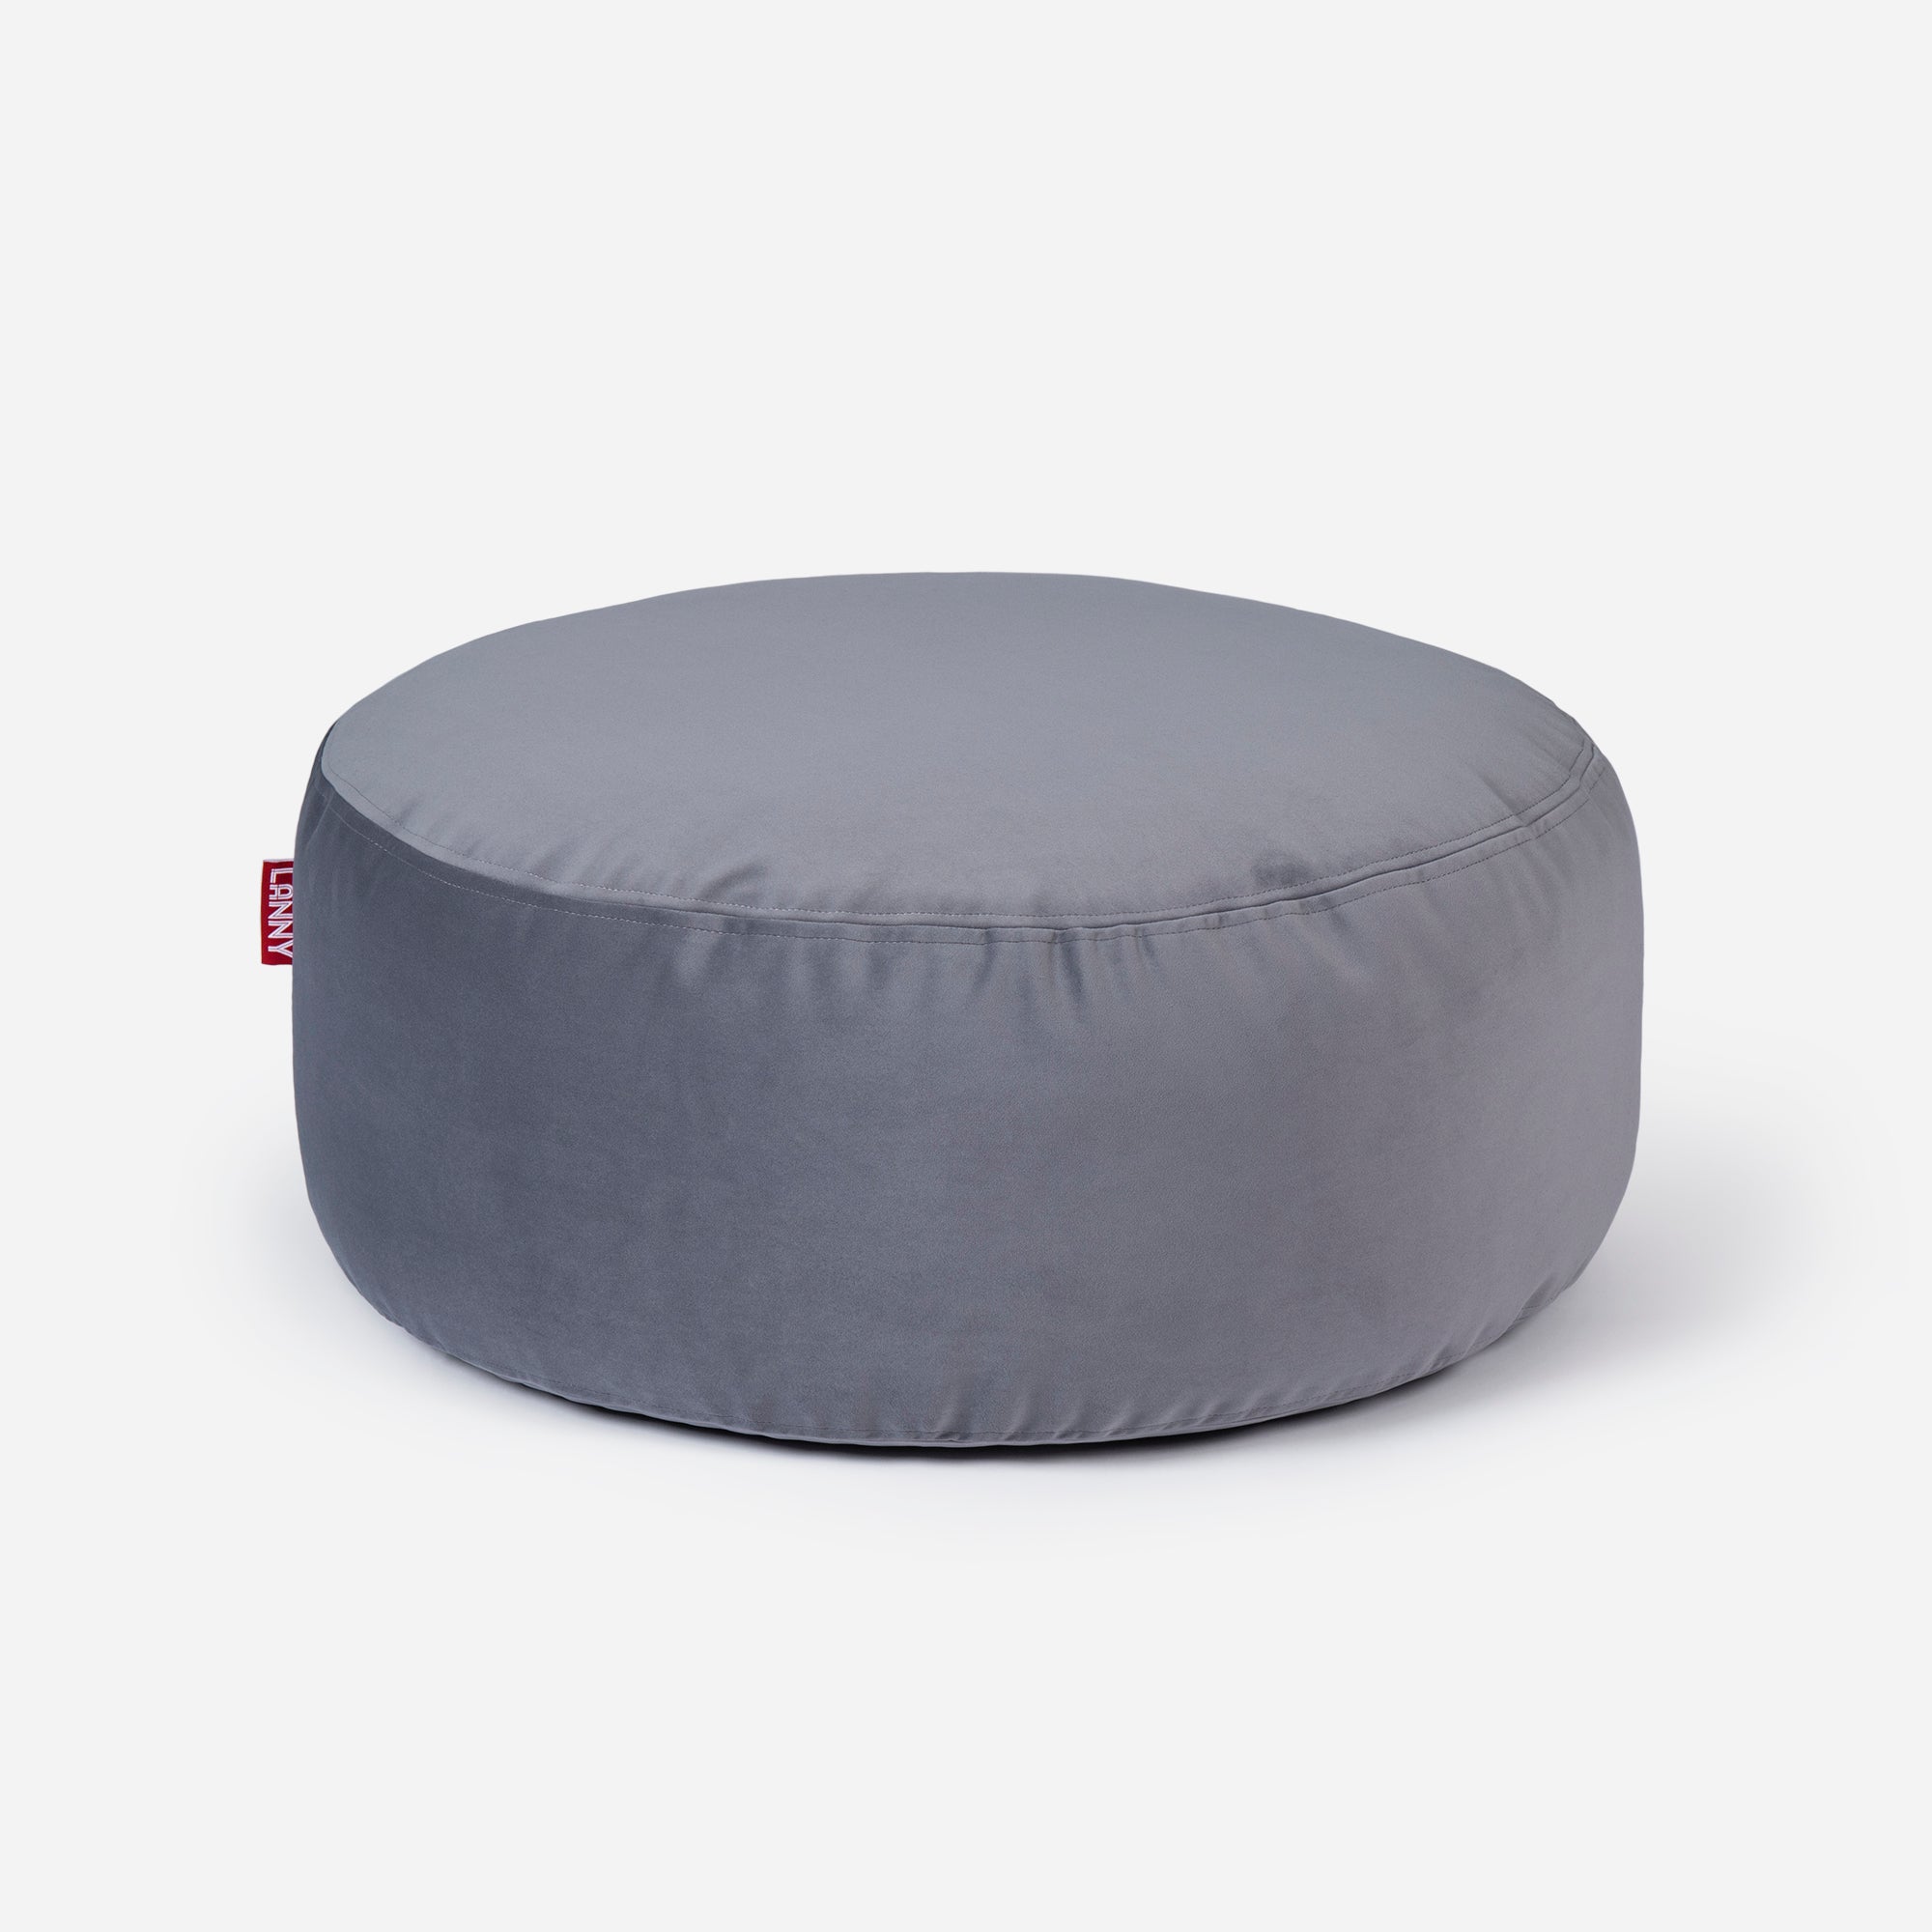 Lanny pouf made from velvet fabric in Gray color